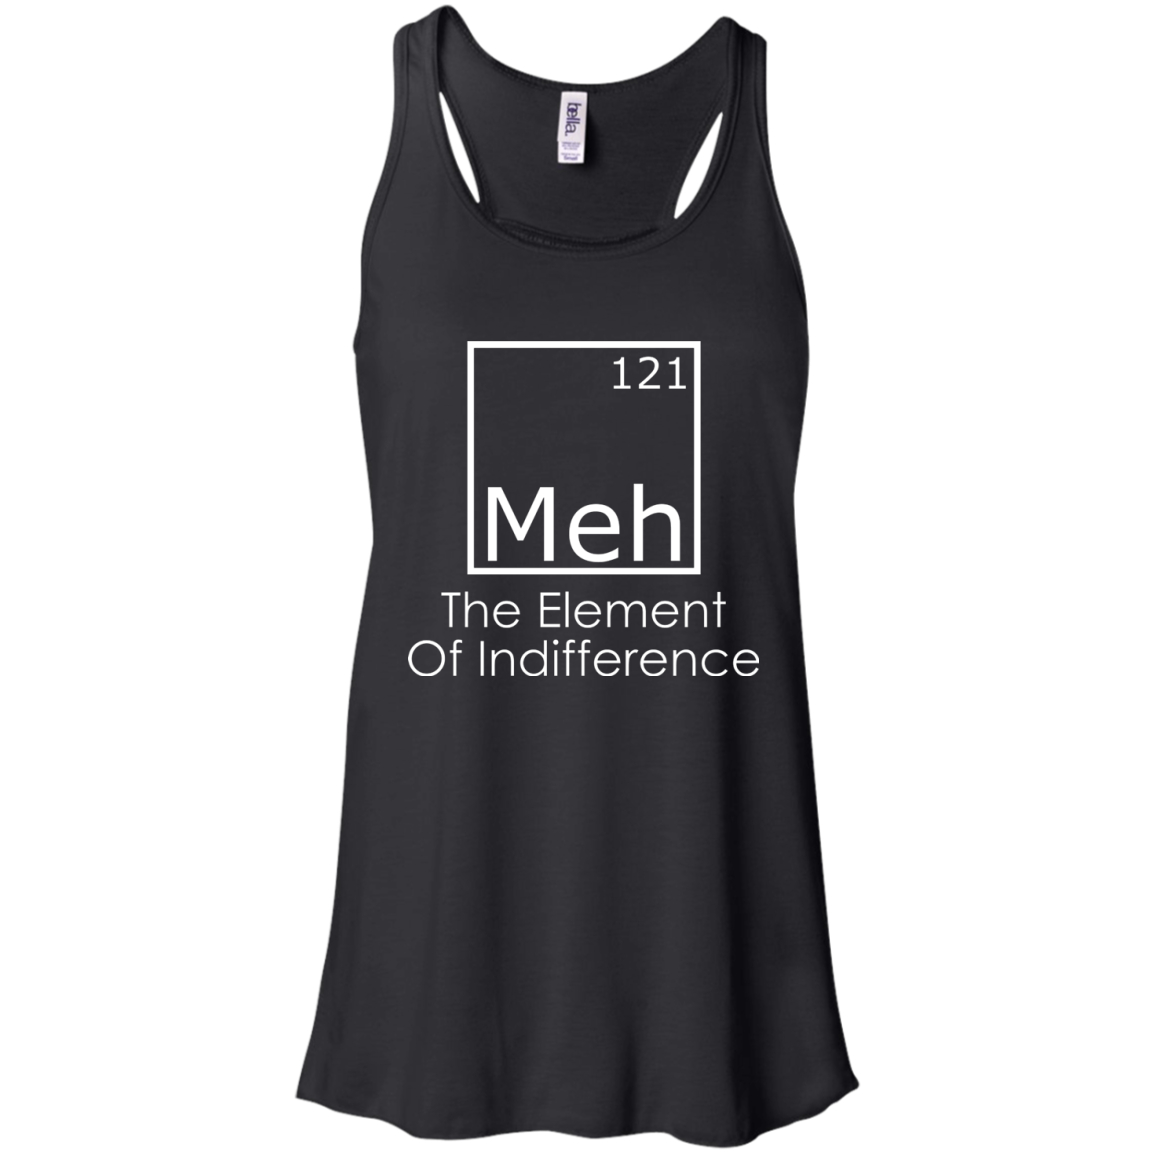 Meh - The Element of Indifference